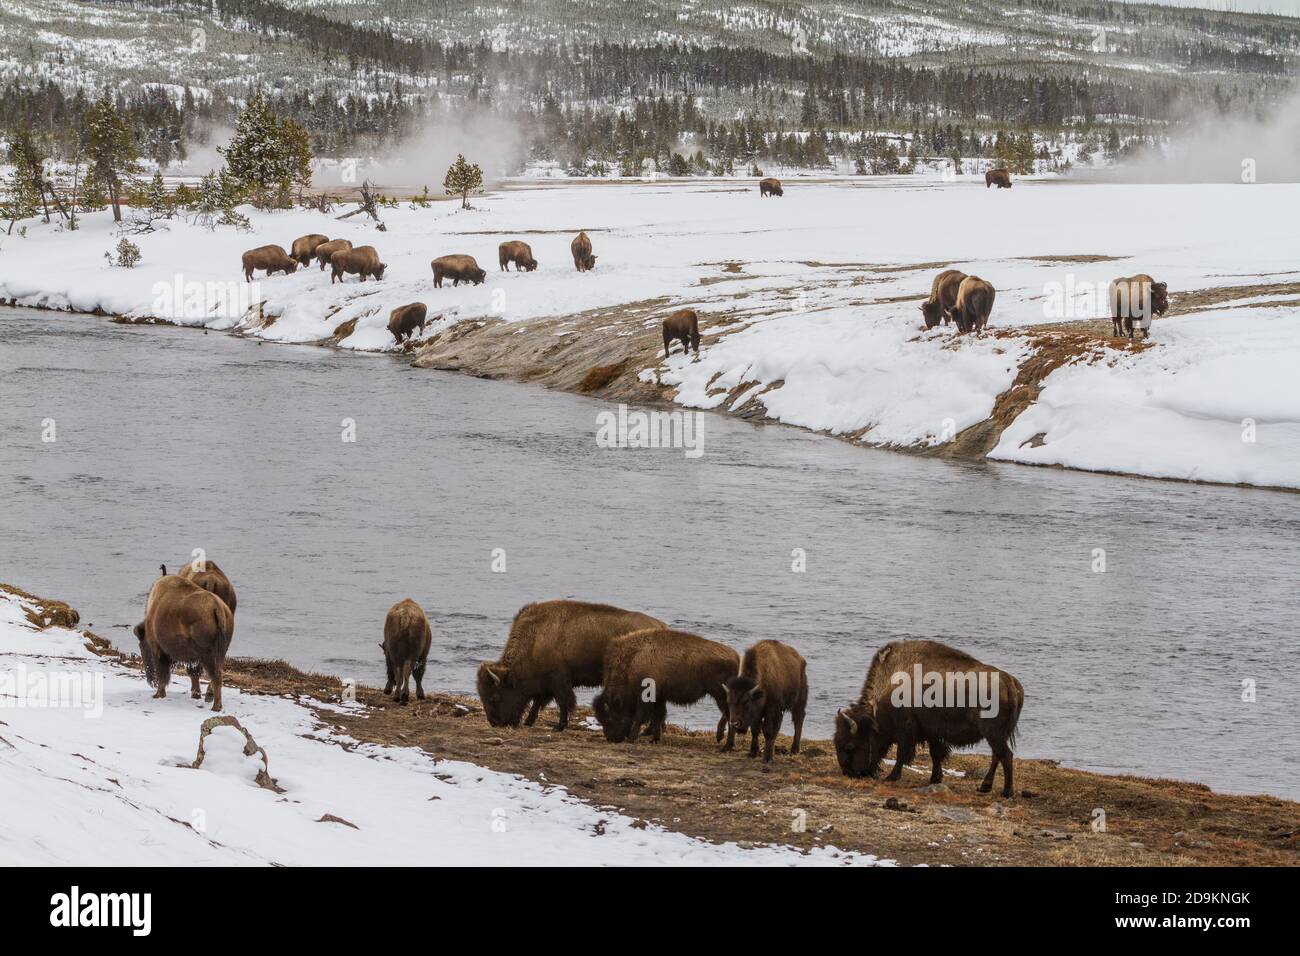 American bison grazing in the snow along the Firehole River in the Lopper Geyser Basin of Yellowstone National Park, Wyoming, USA. Stock Photo